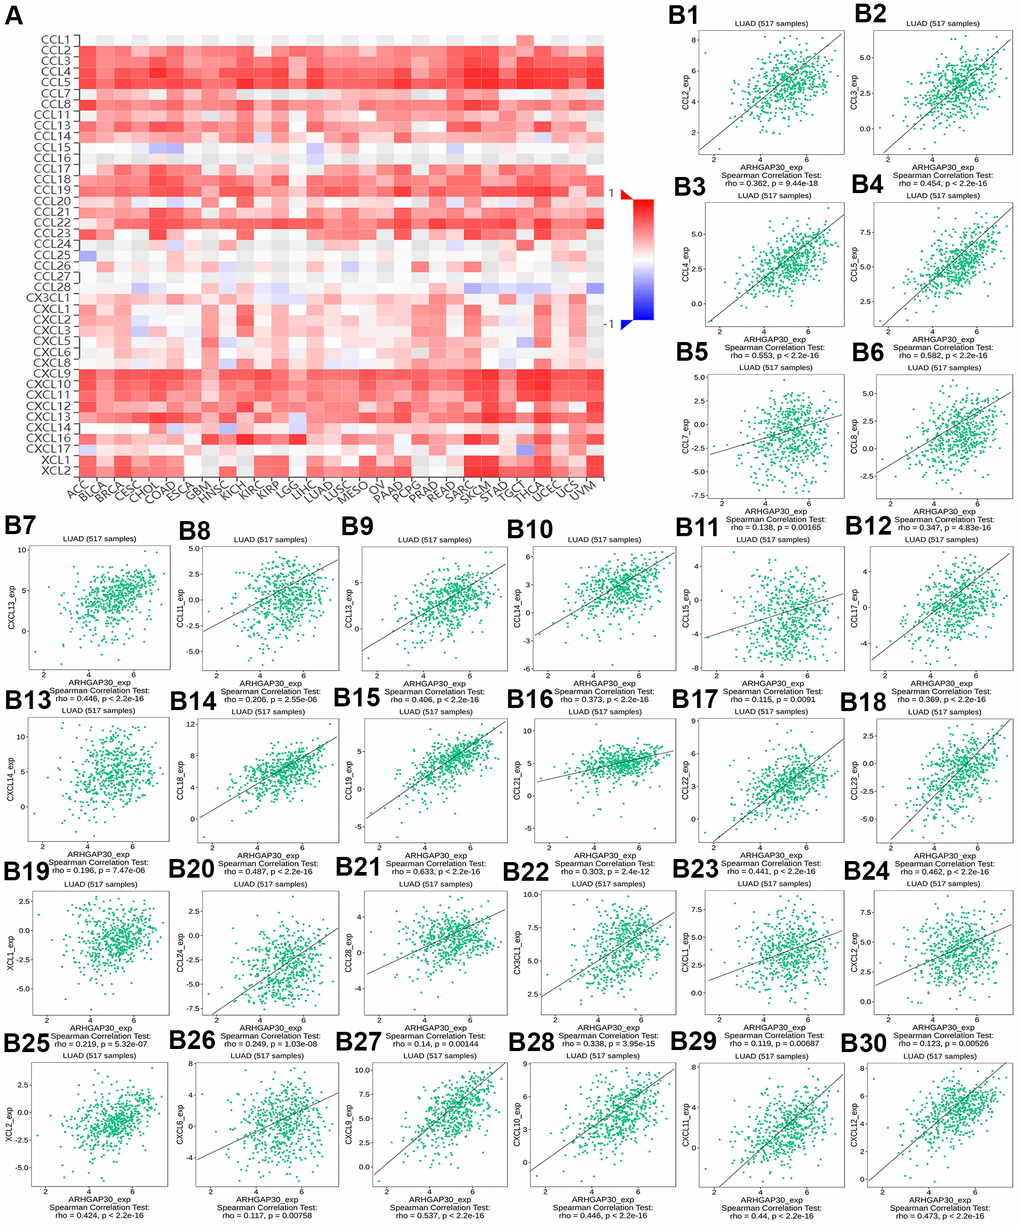 The correlation between the DNA methylation of ARHGAP30 and immune inhibitors. (A) Heat map of Spearman correlations between DNA methylation of ARHGAP30 and immune inhibitors across human cancers. (B1–B30) Scatter plots showing the negative correlation between DNA methylation of ARHGAP30 and immune inhibitors in the treatment of lung adenocarcinoma.